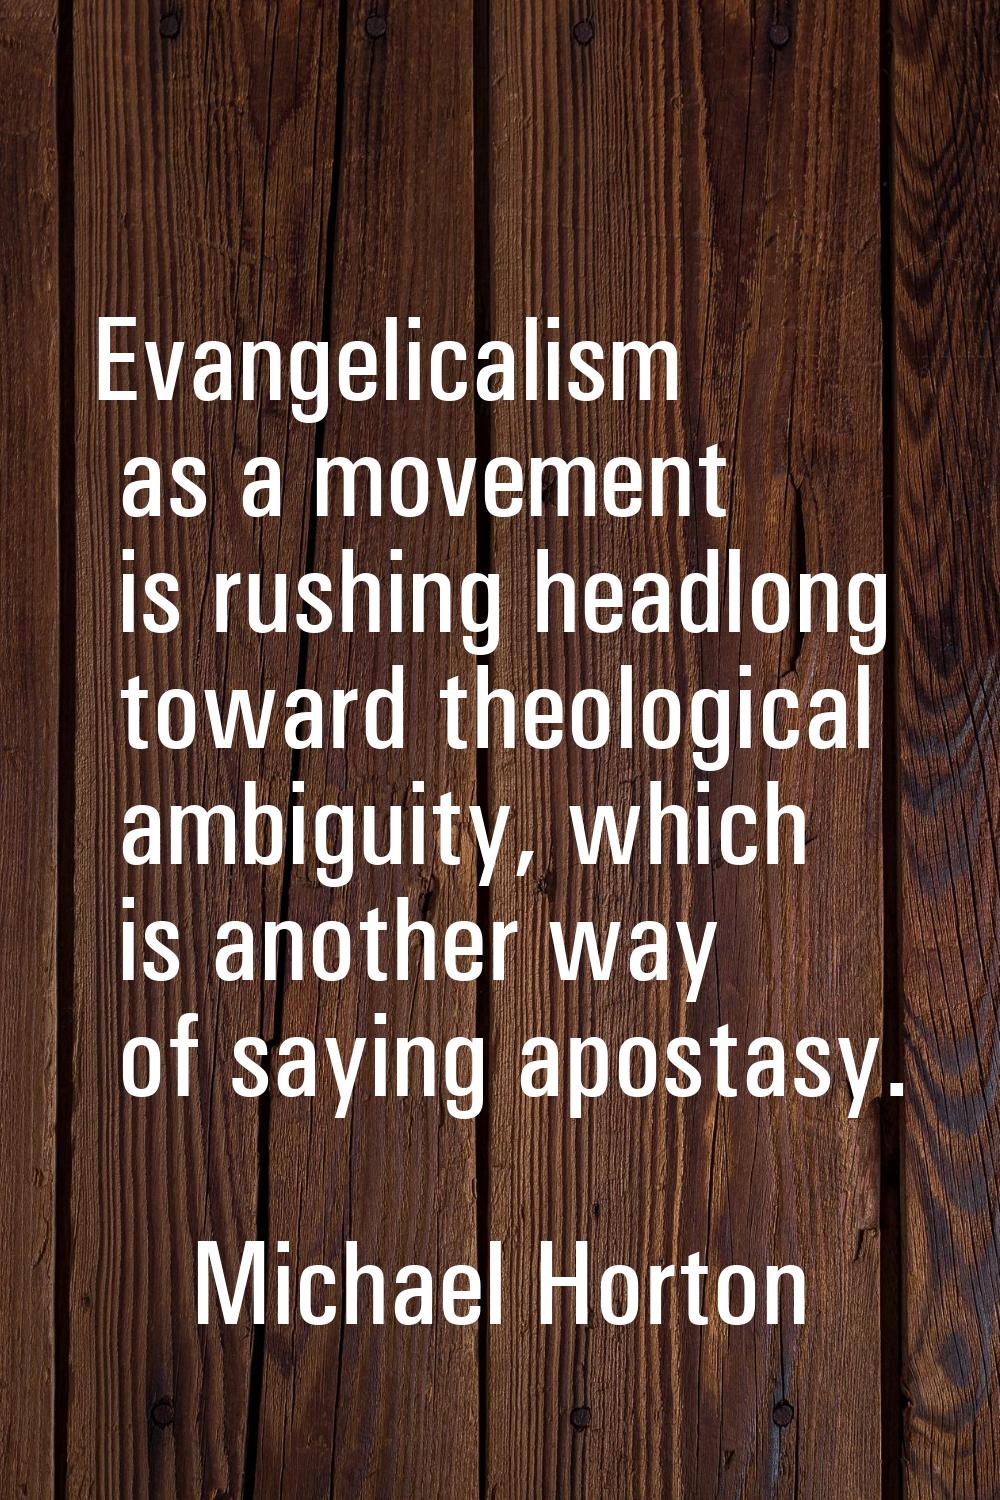 Evangelicalism as a movement is rushing headlong toward theological ambiguity, which is another way